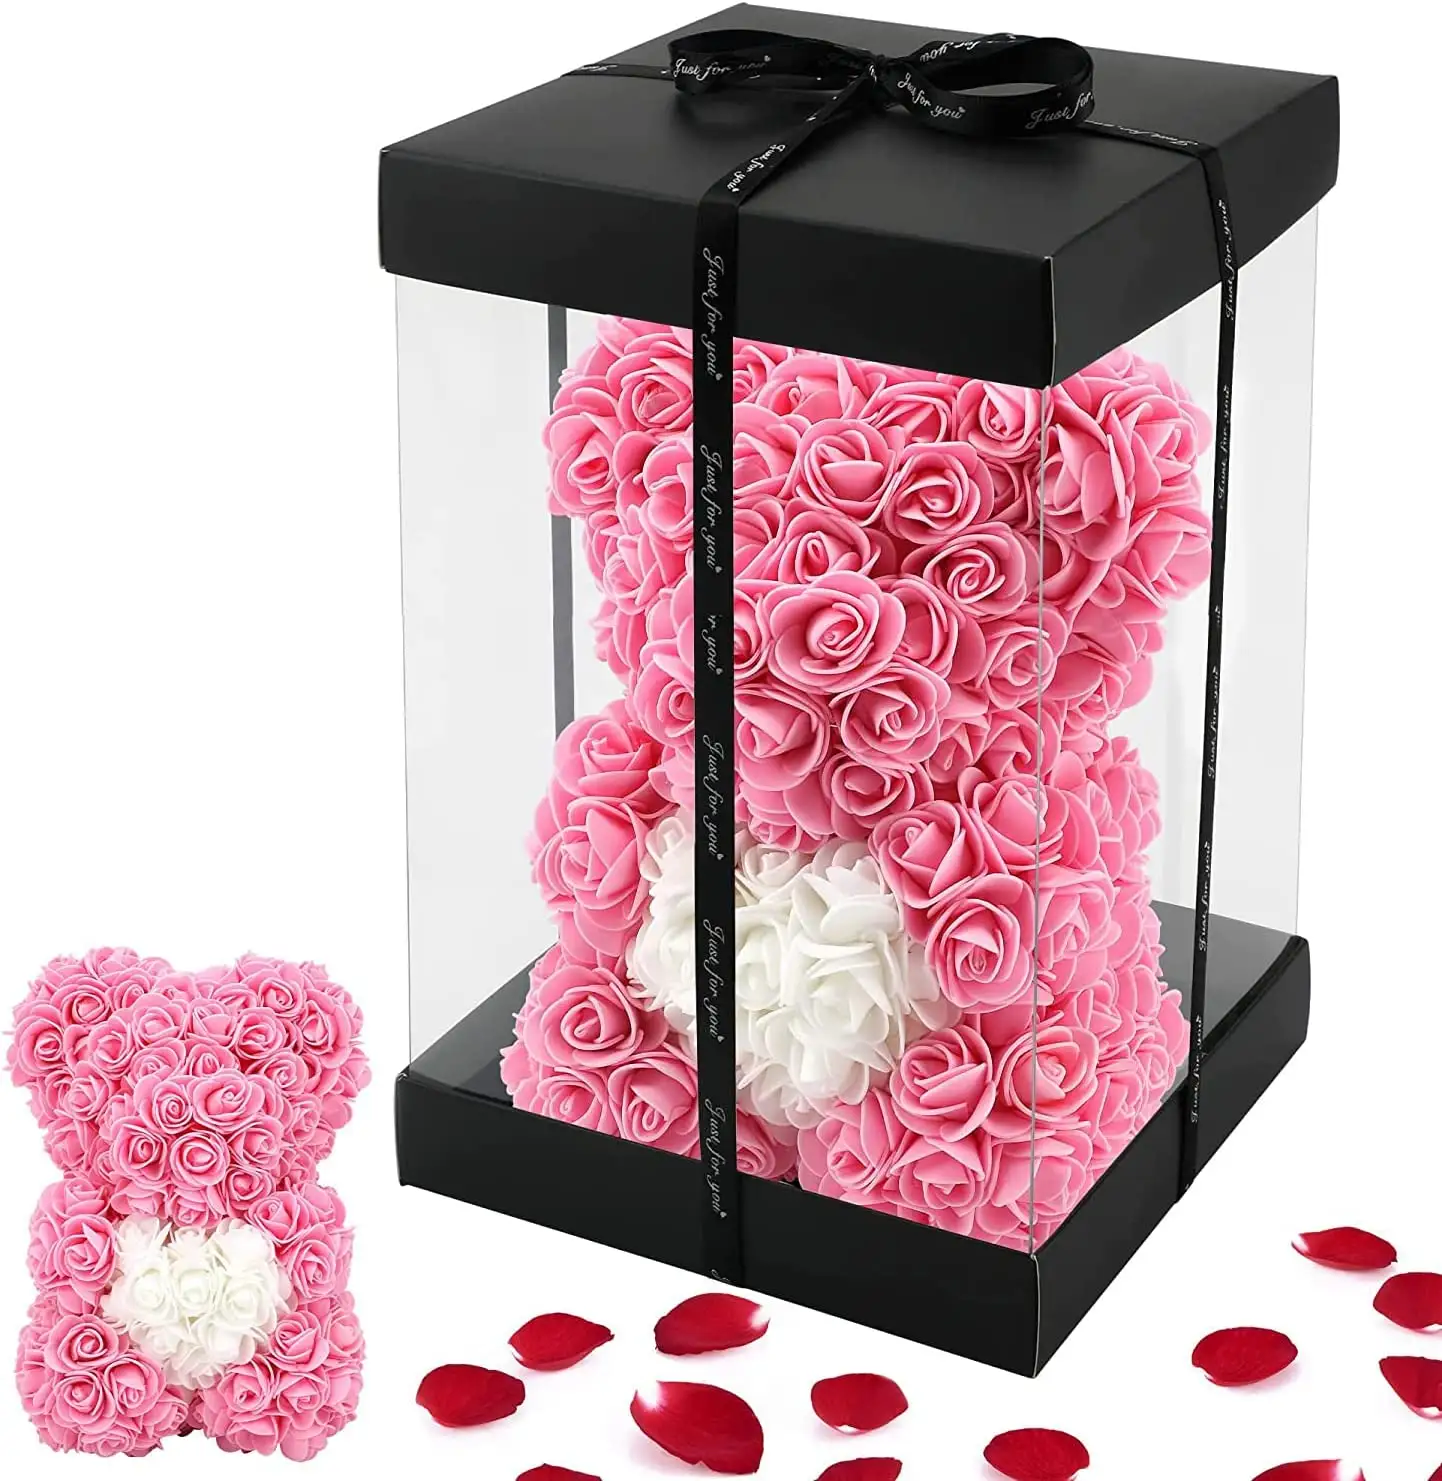 Valentines Day Gifts 2023 Rose Bear, Rose Teddy Bear with Lights Roses Forever, Window Display